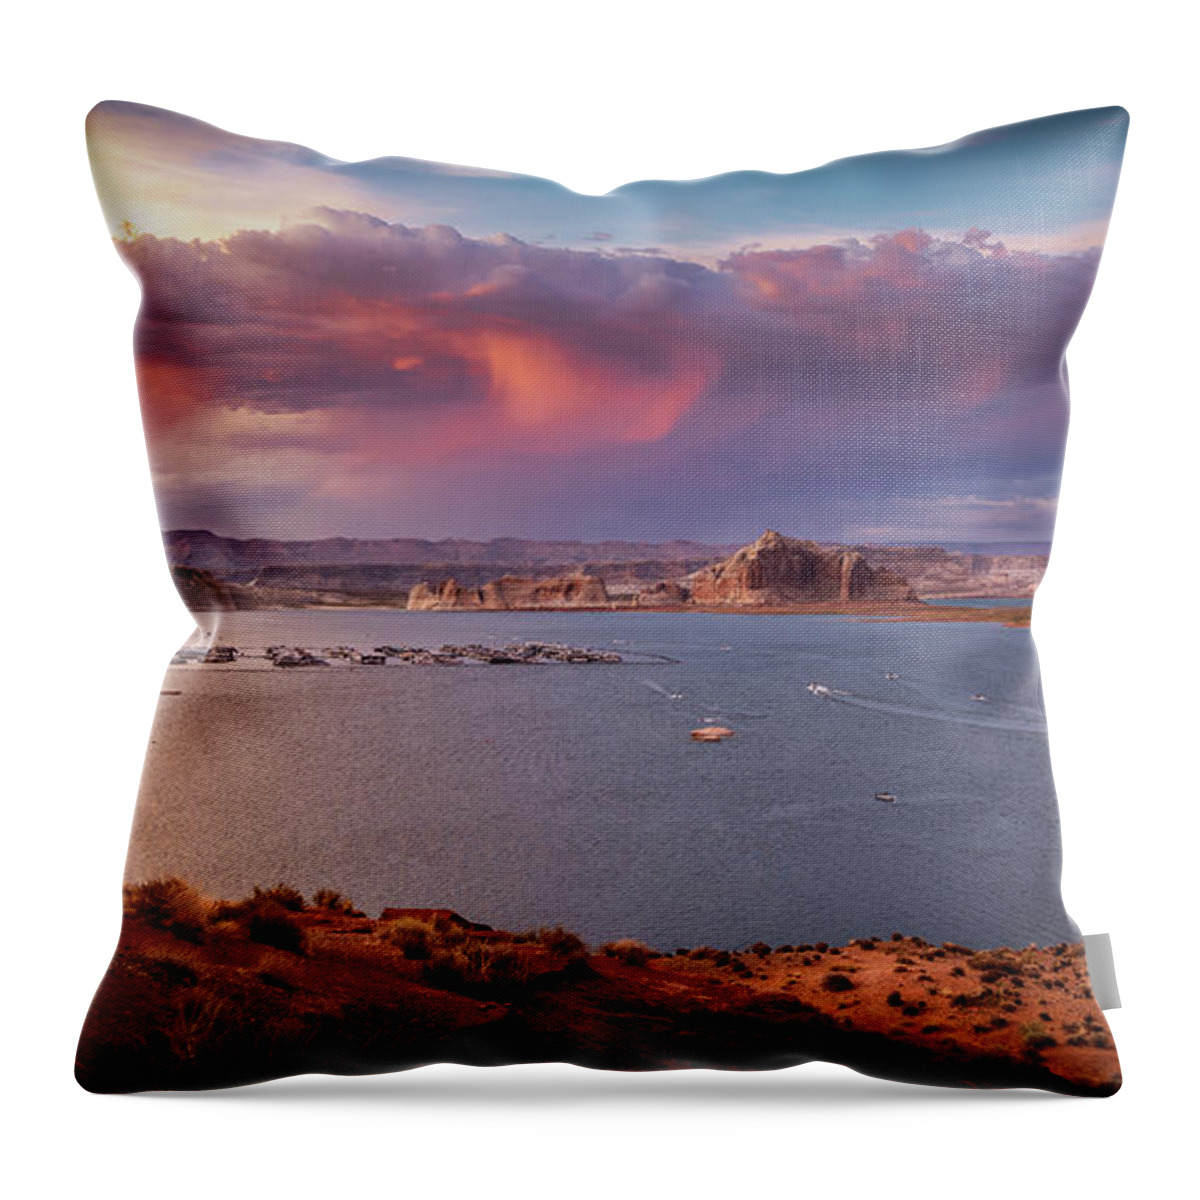 Sunset Throw Pillow featuring the photograph Wahweap Bay Sunset by Bradley Morris